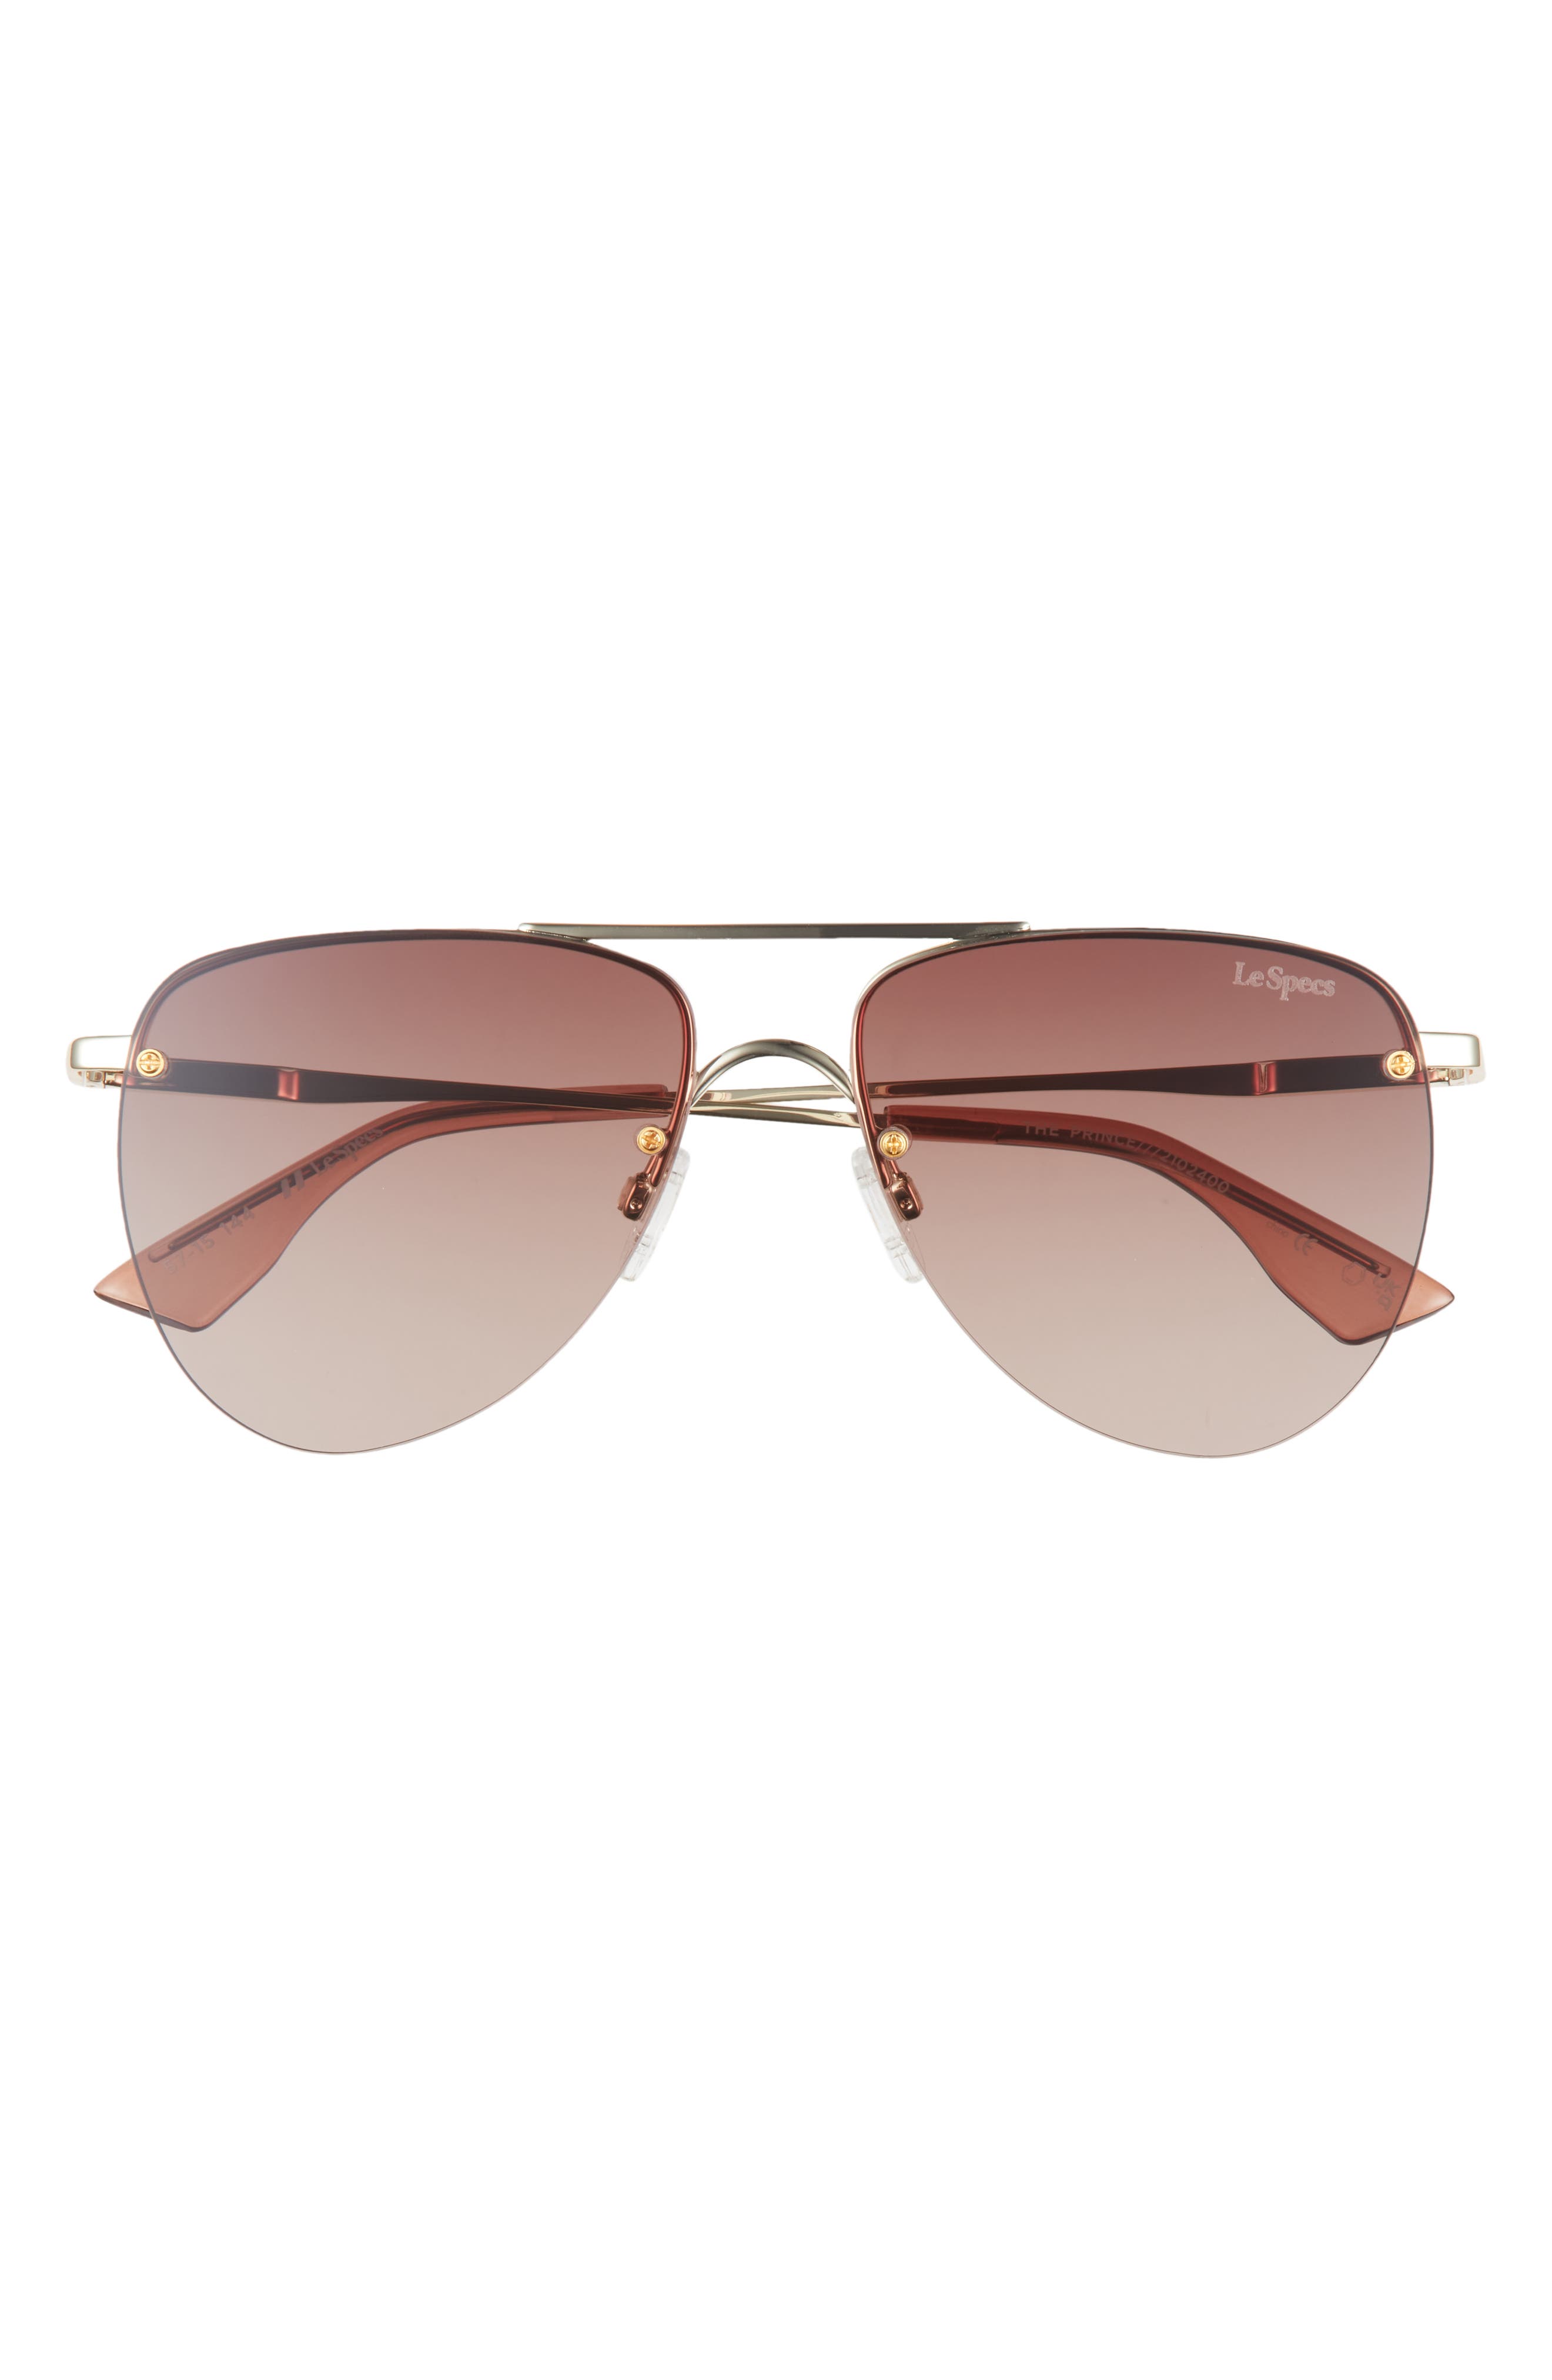 Le Specs The Prince 57mm Aviator Sunglasses in Gold/Brown Grad Flash at Nordstrom